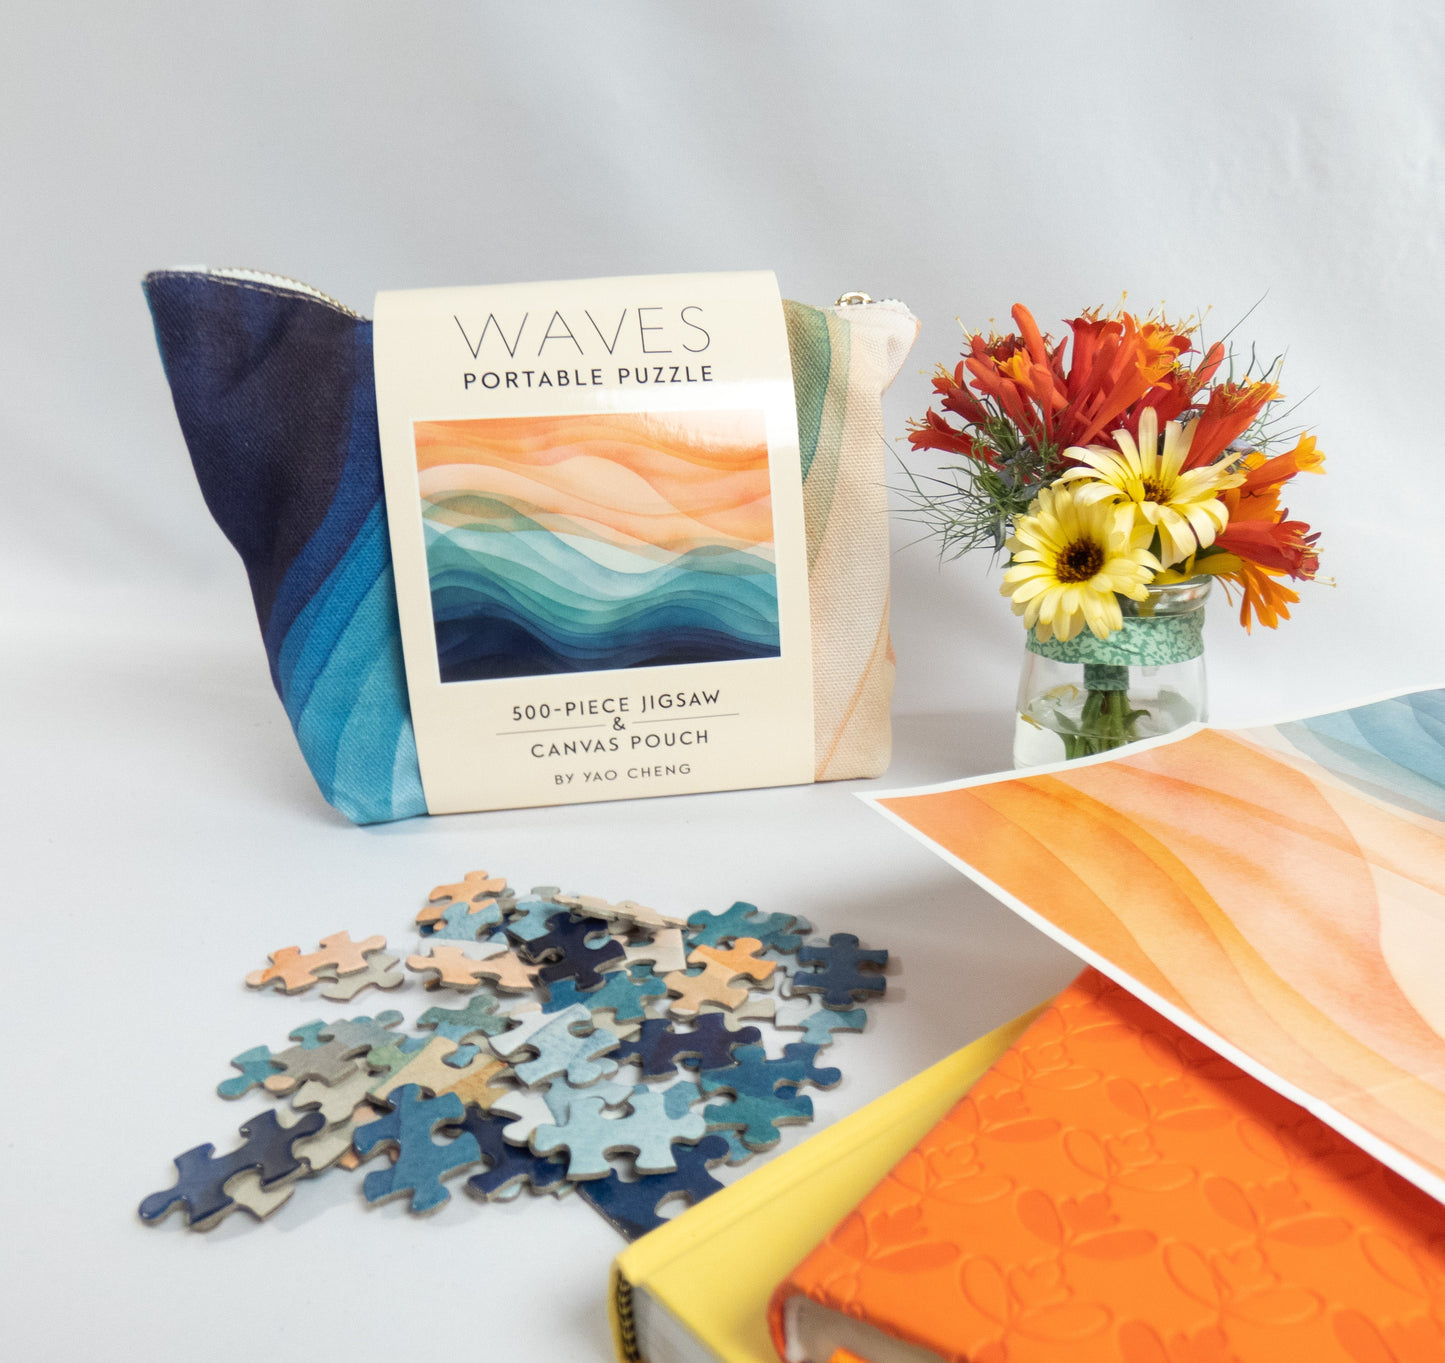 Waves 500 Piece Portable Jigsaw Puzzle